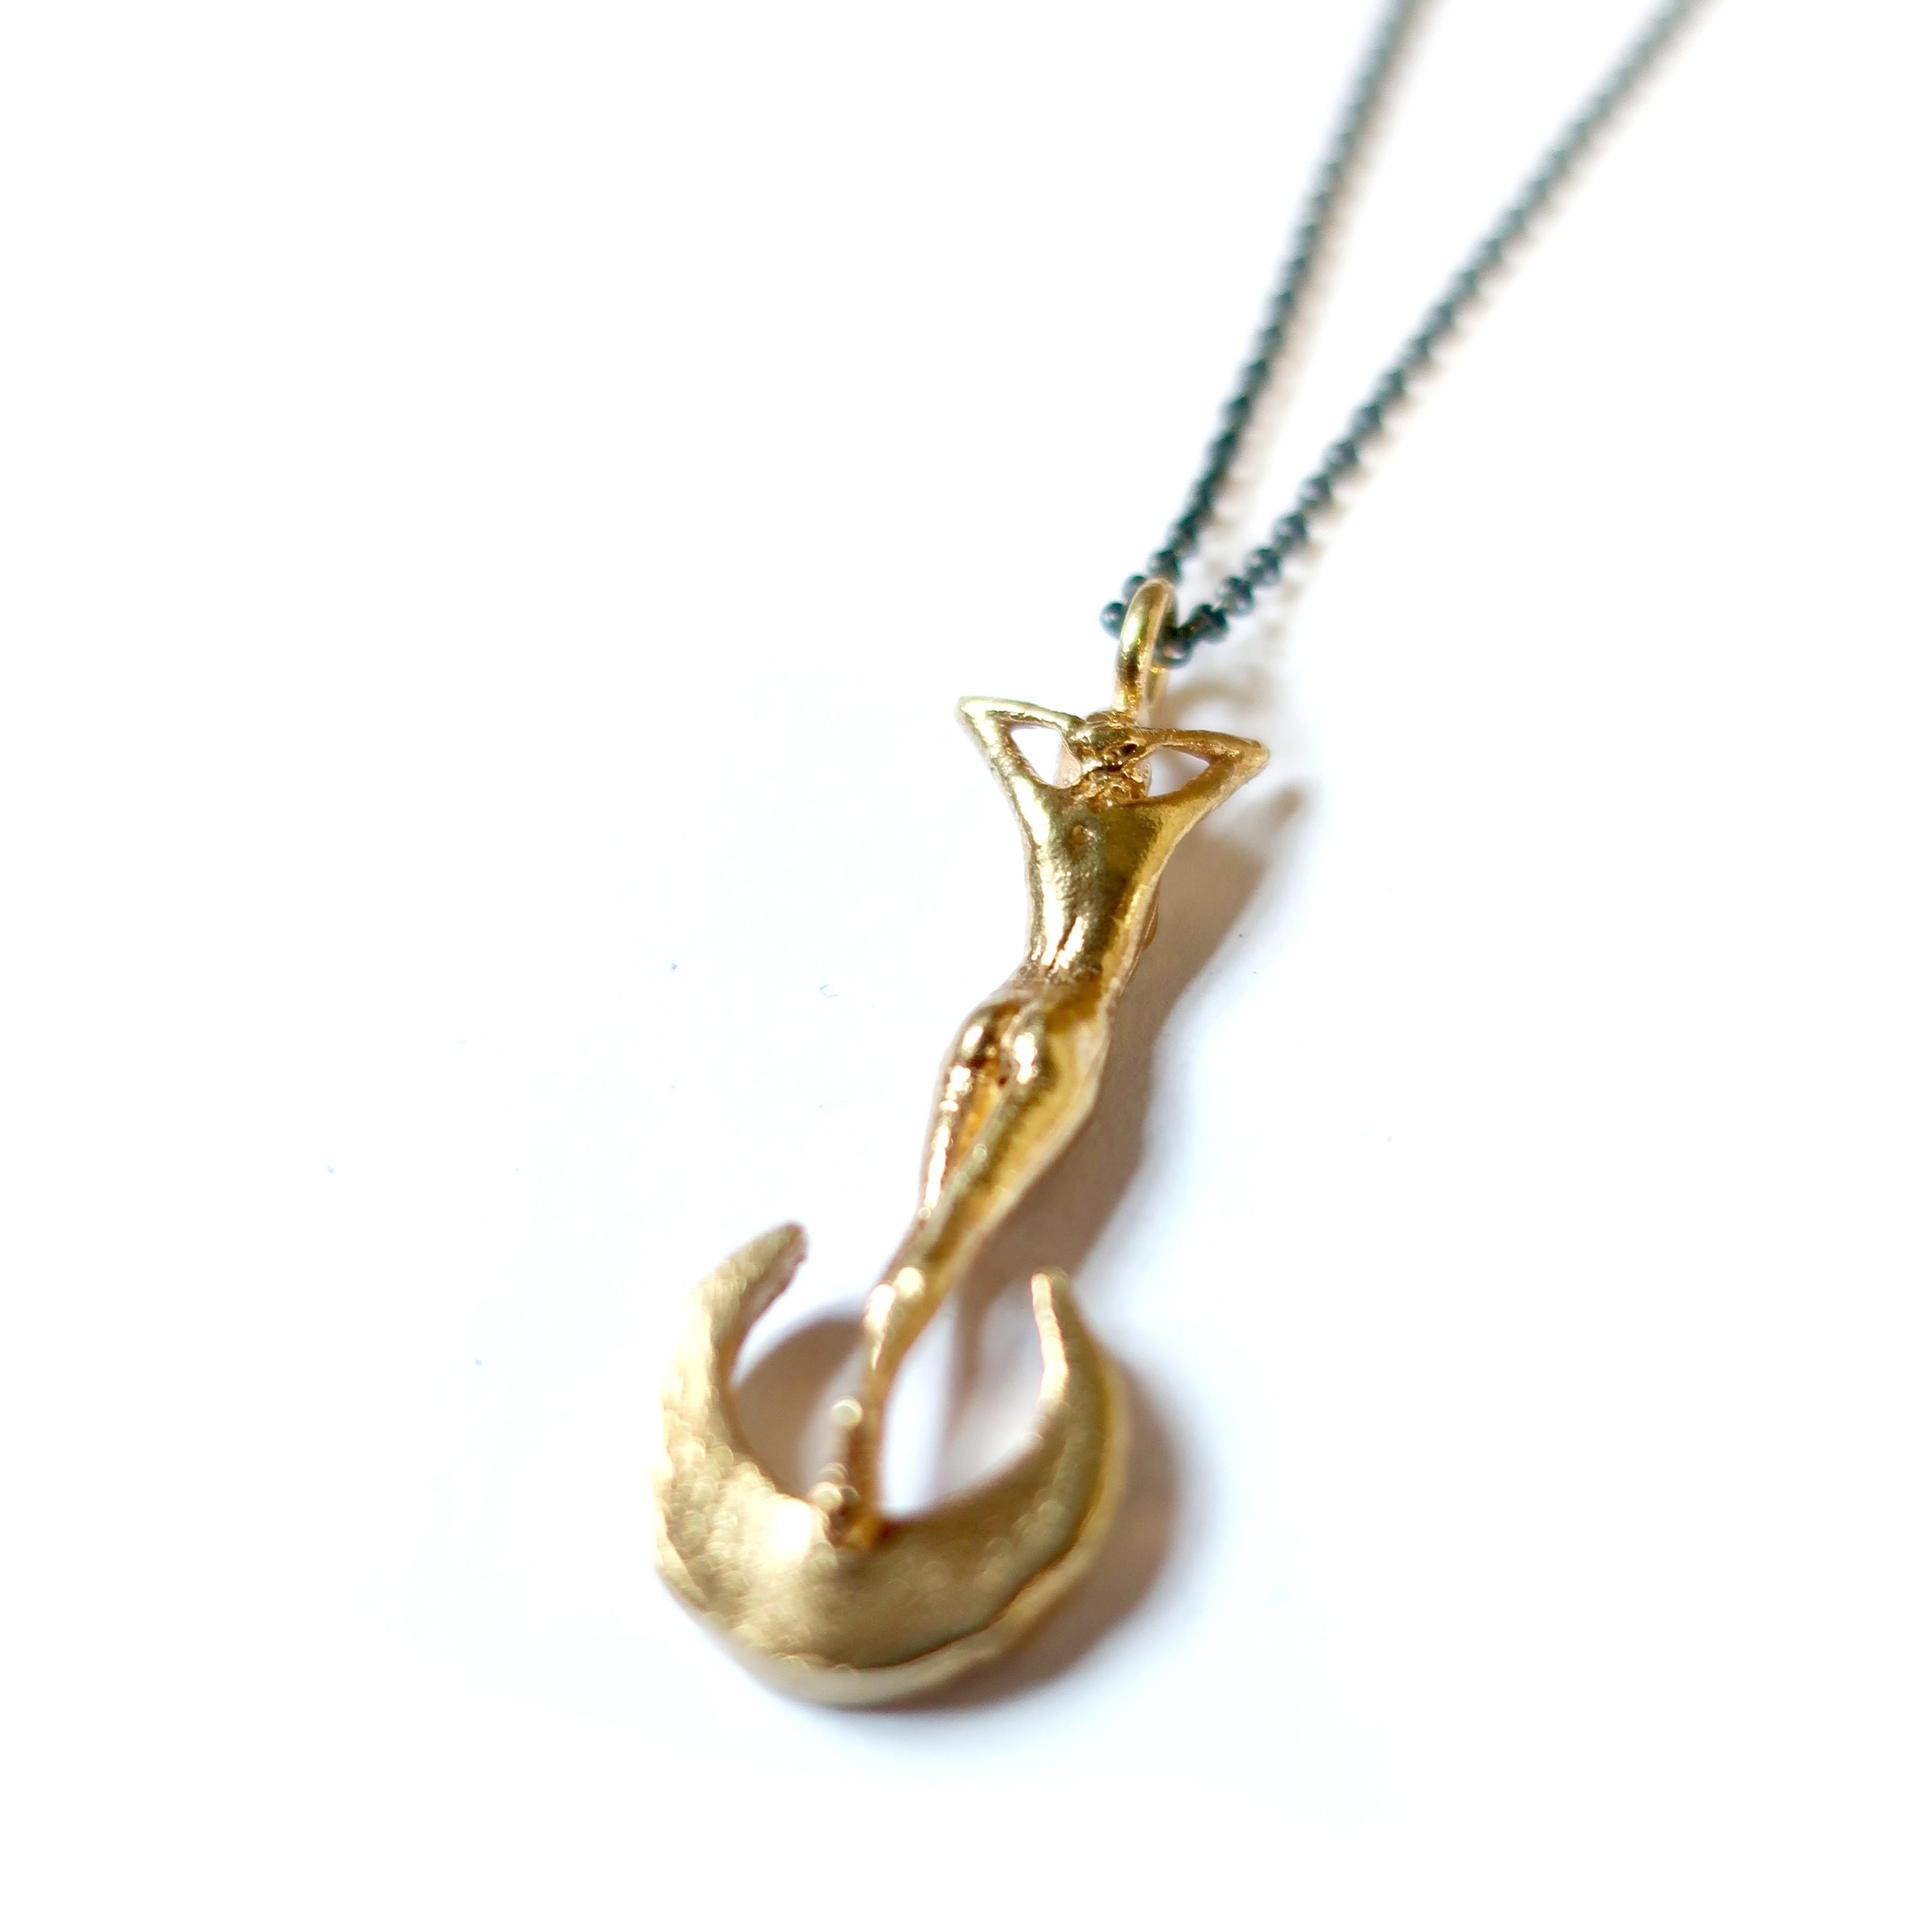 Cast in solid 14k yellow gold this statuesque woman perched atop a crescent moon is a stunning ode to classic art nouveau themes in jewelry. Strung on a solid 20 inch twisted rope chain this pendant measures 33mm in height.  The moon is bead set